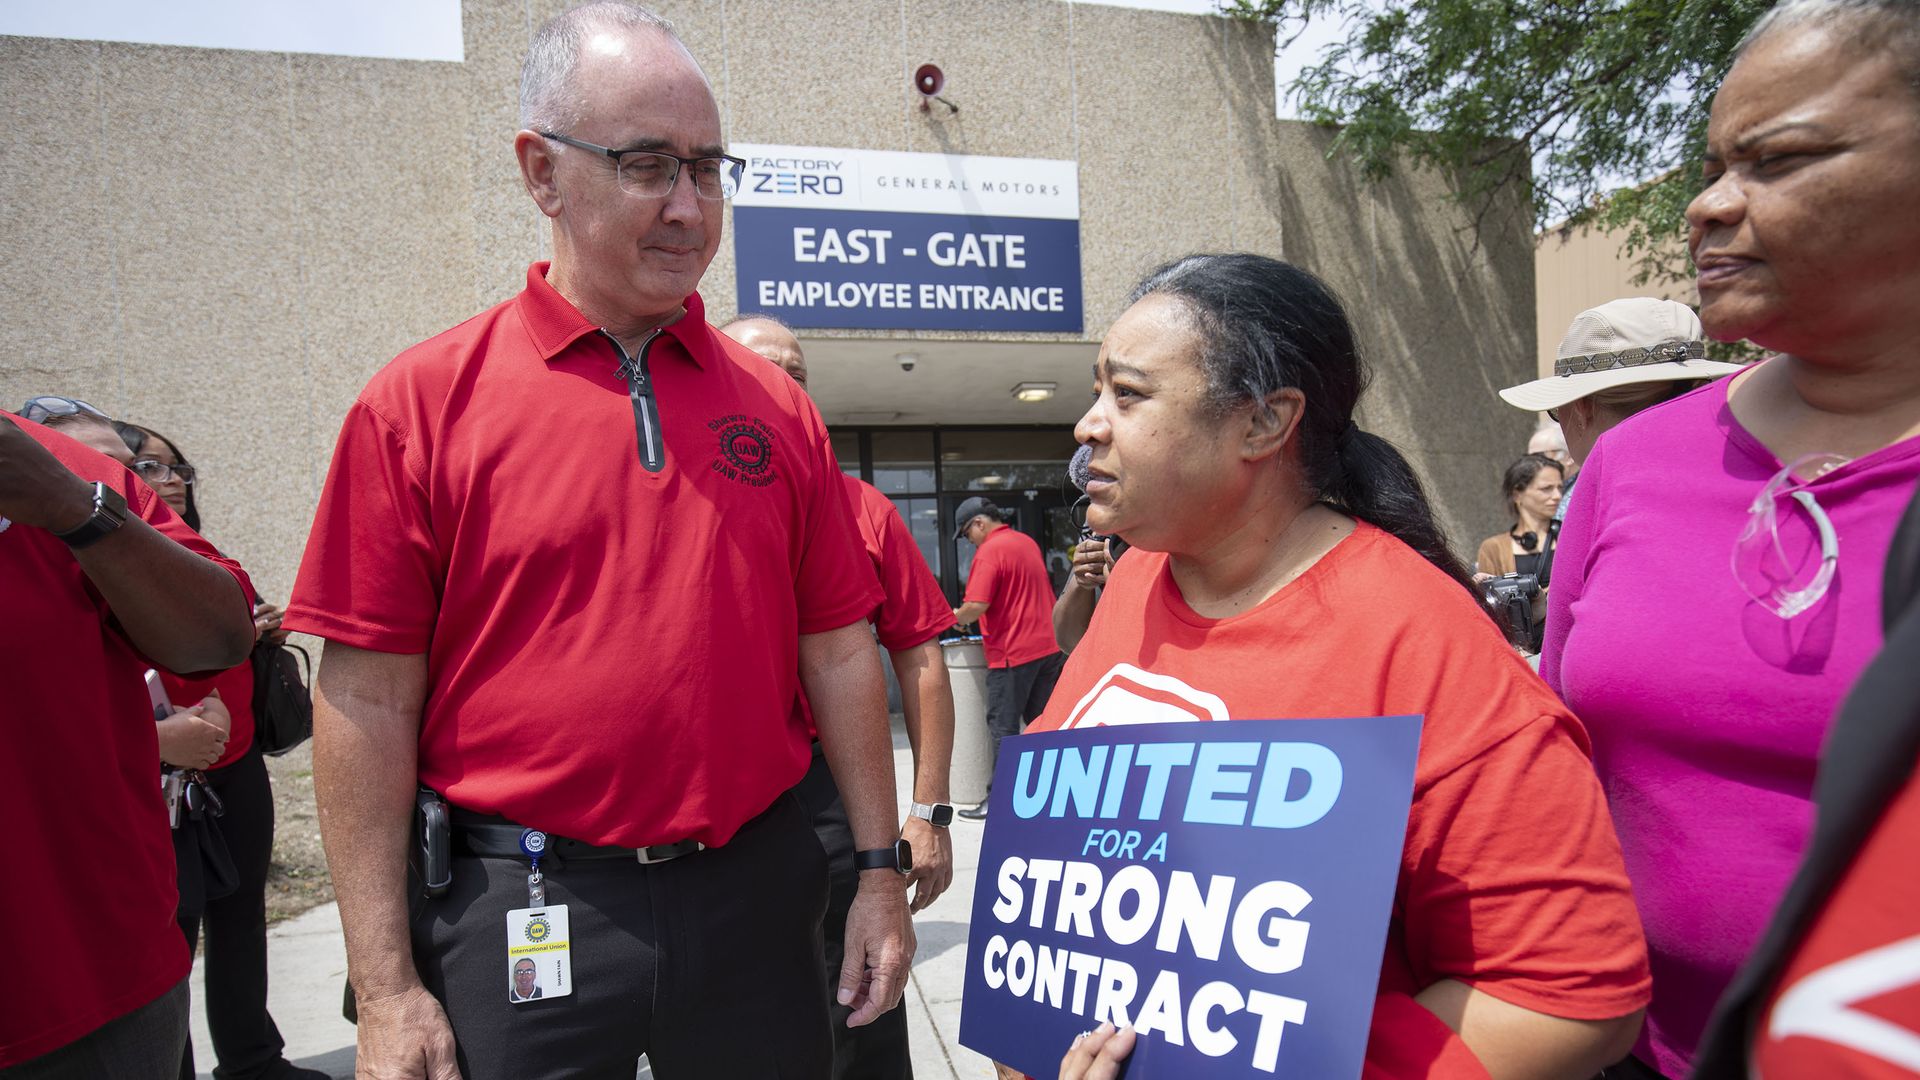 UAW President Shawn Fain meets with local workers at GM's Factory Zero last month wearing a red shirt